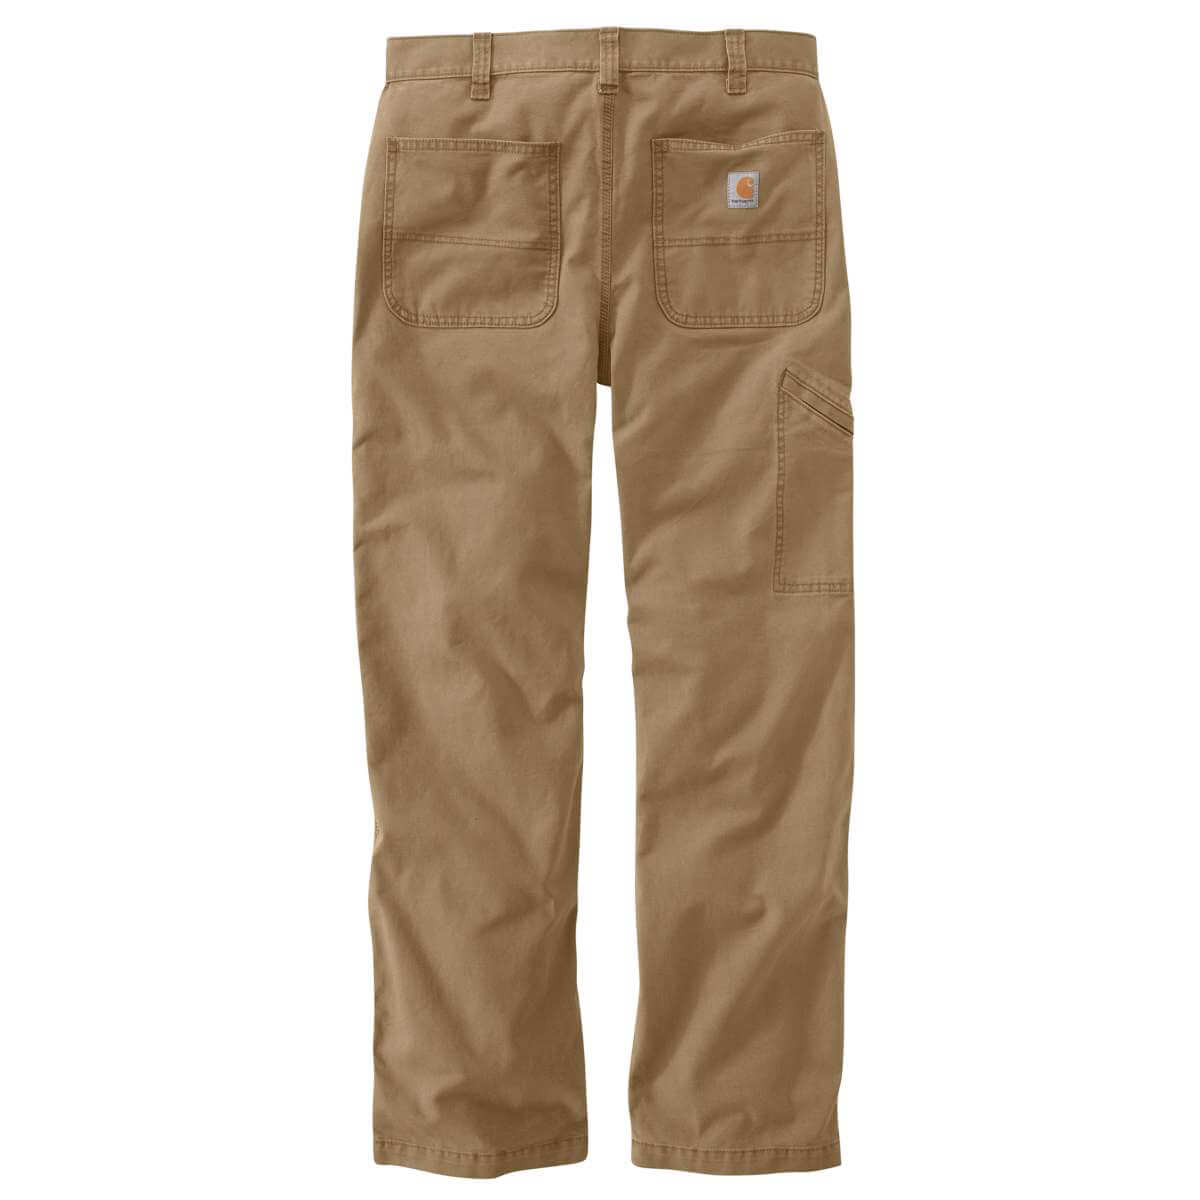 Carhartt Men's Professional Series Rugged Flex Relaxed Fit Canvas Work Pant